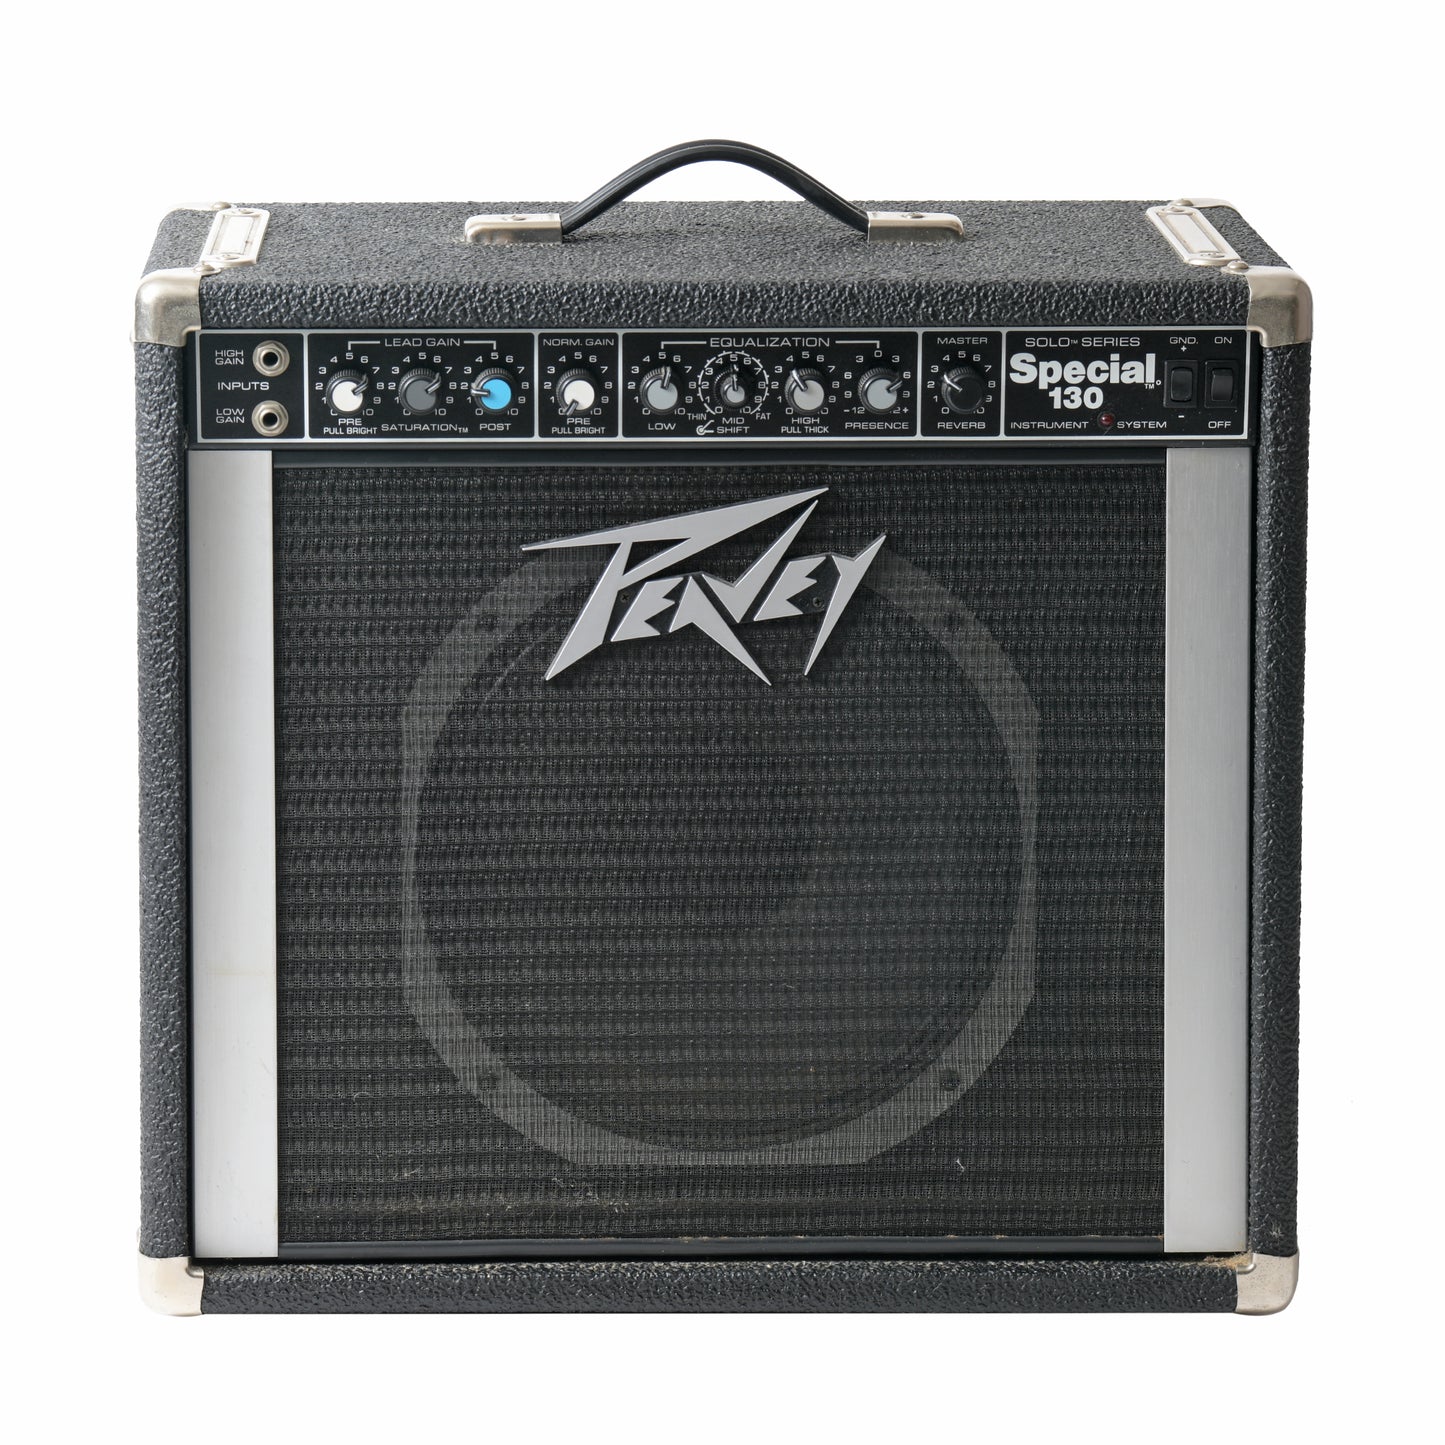 Peavey Special 130 Combo Amp (1980's)